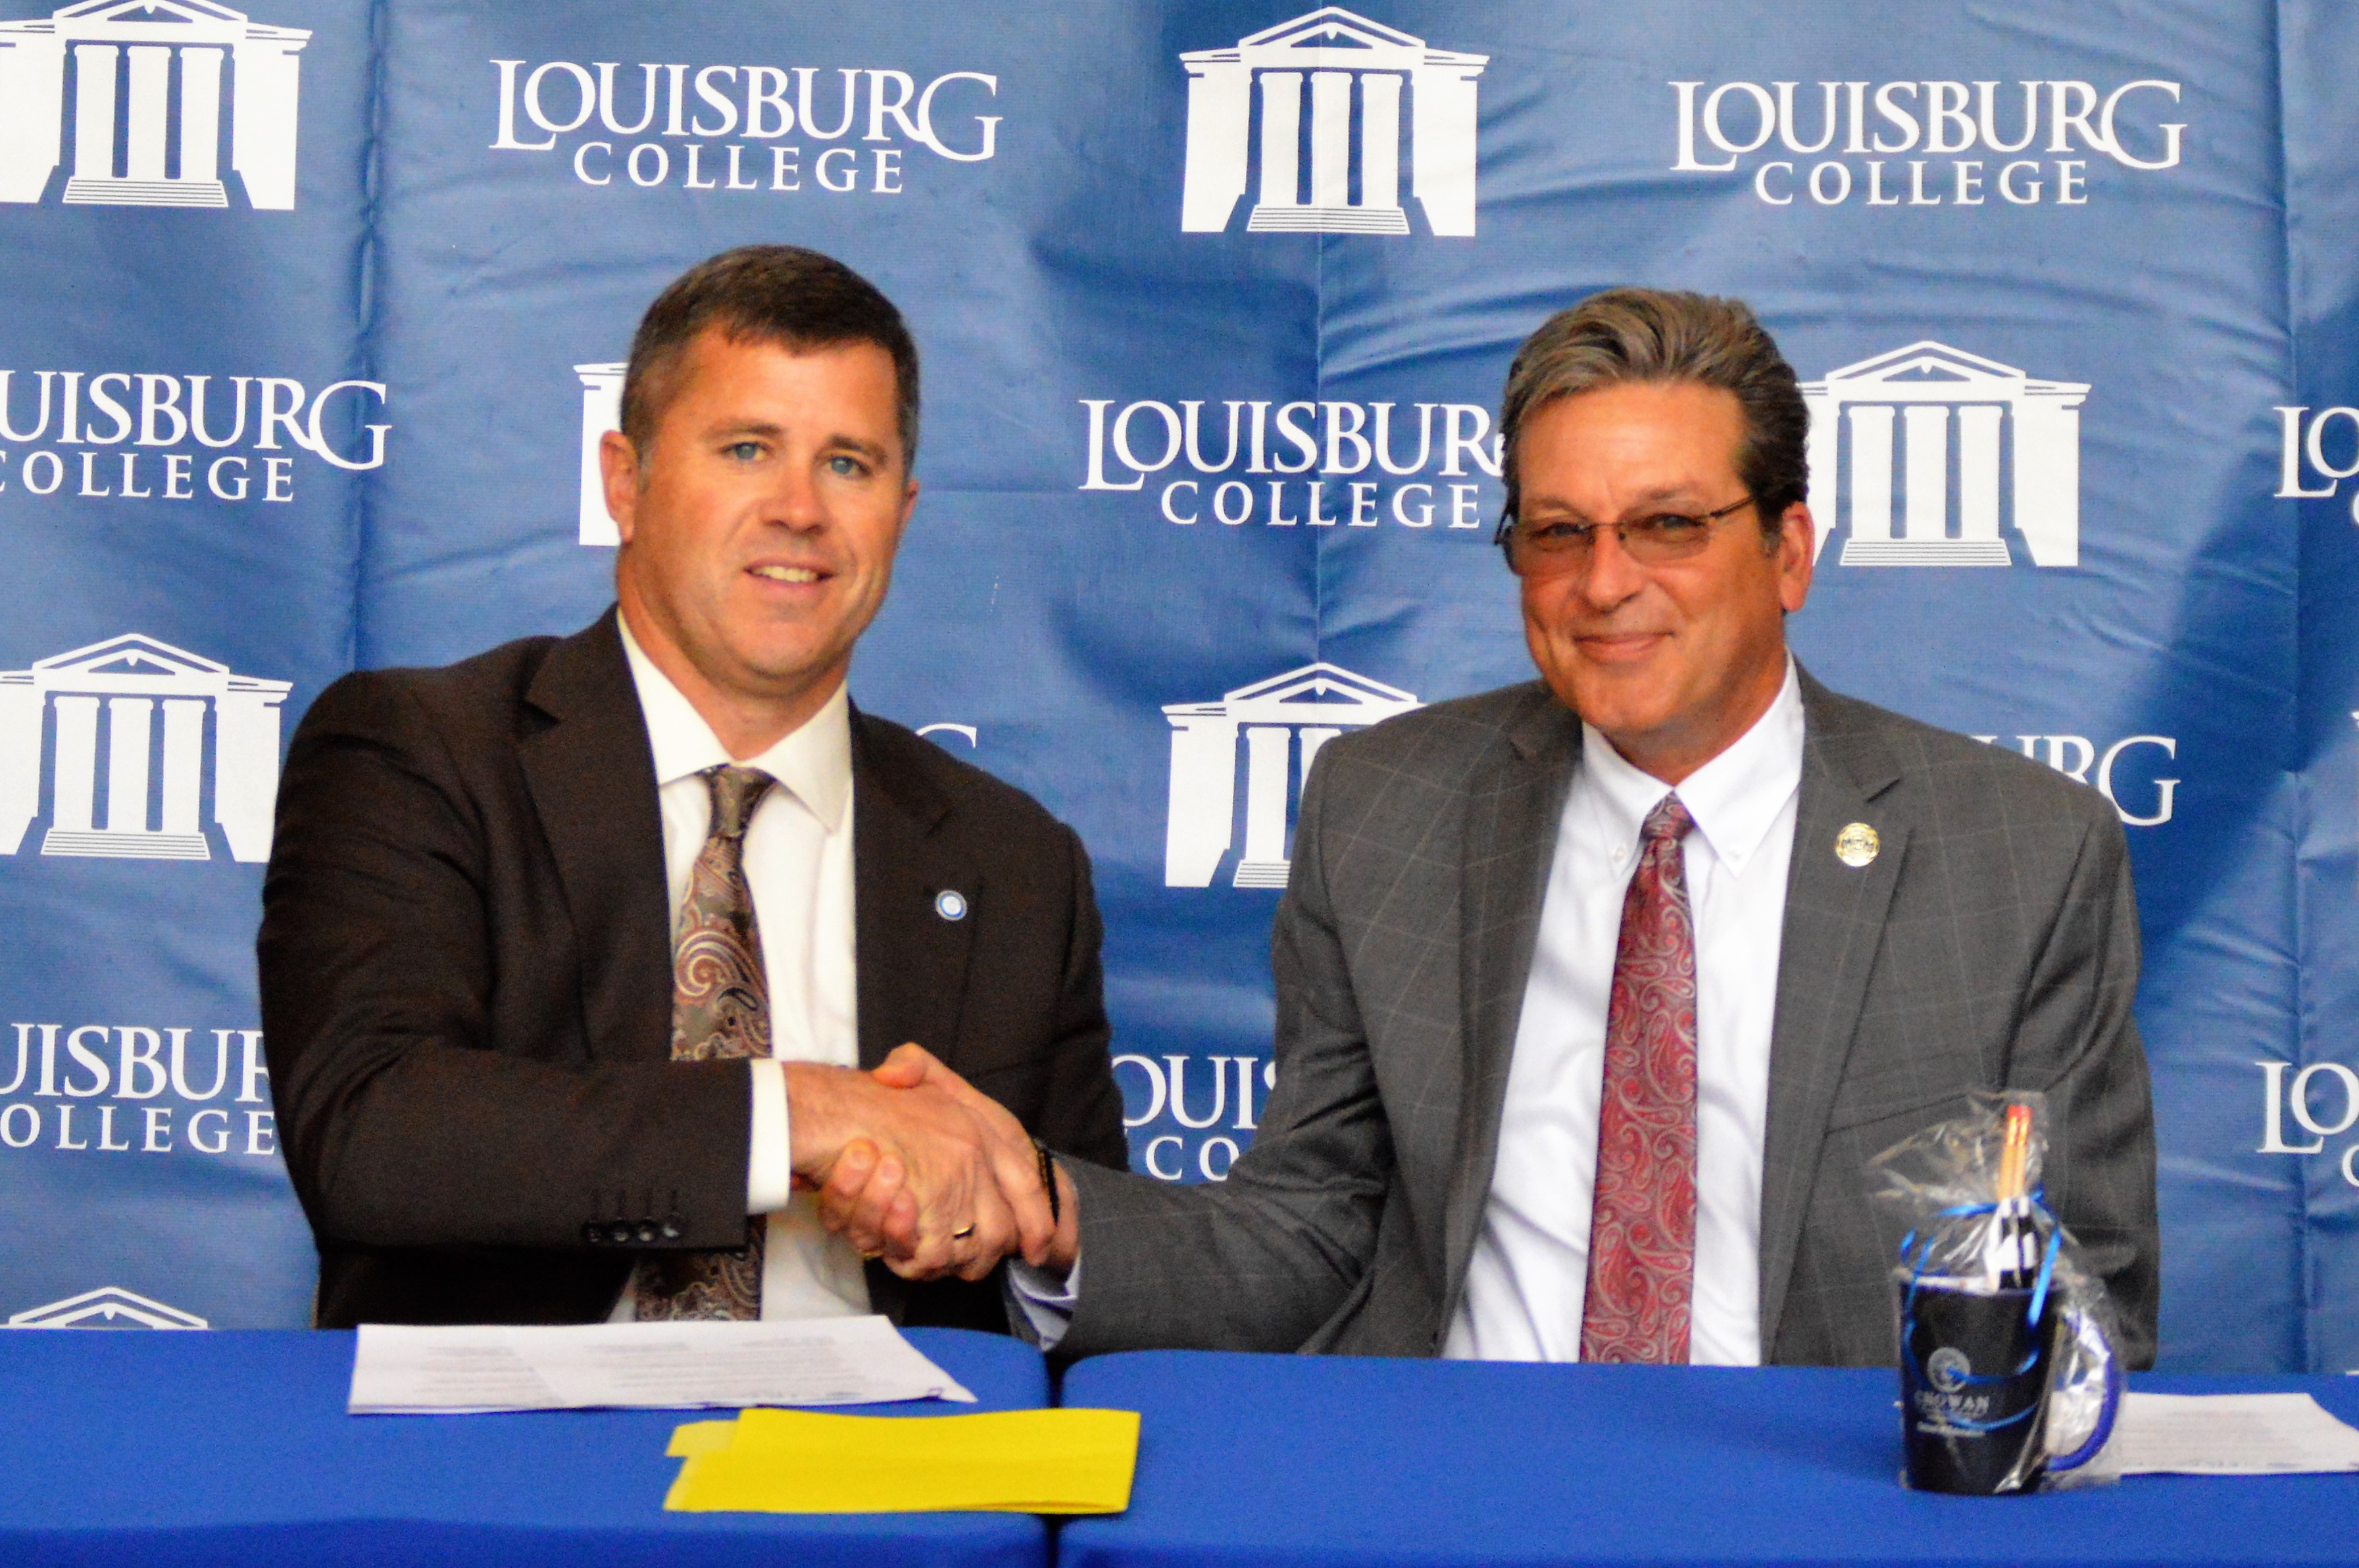 Louisburg College's Education Program signs an articulation agreement with Chowan University.